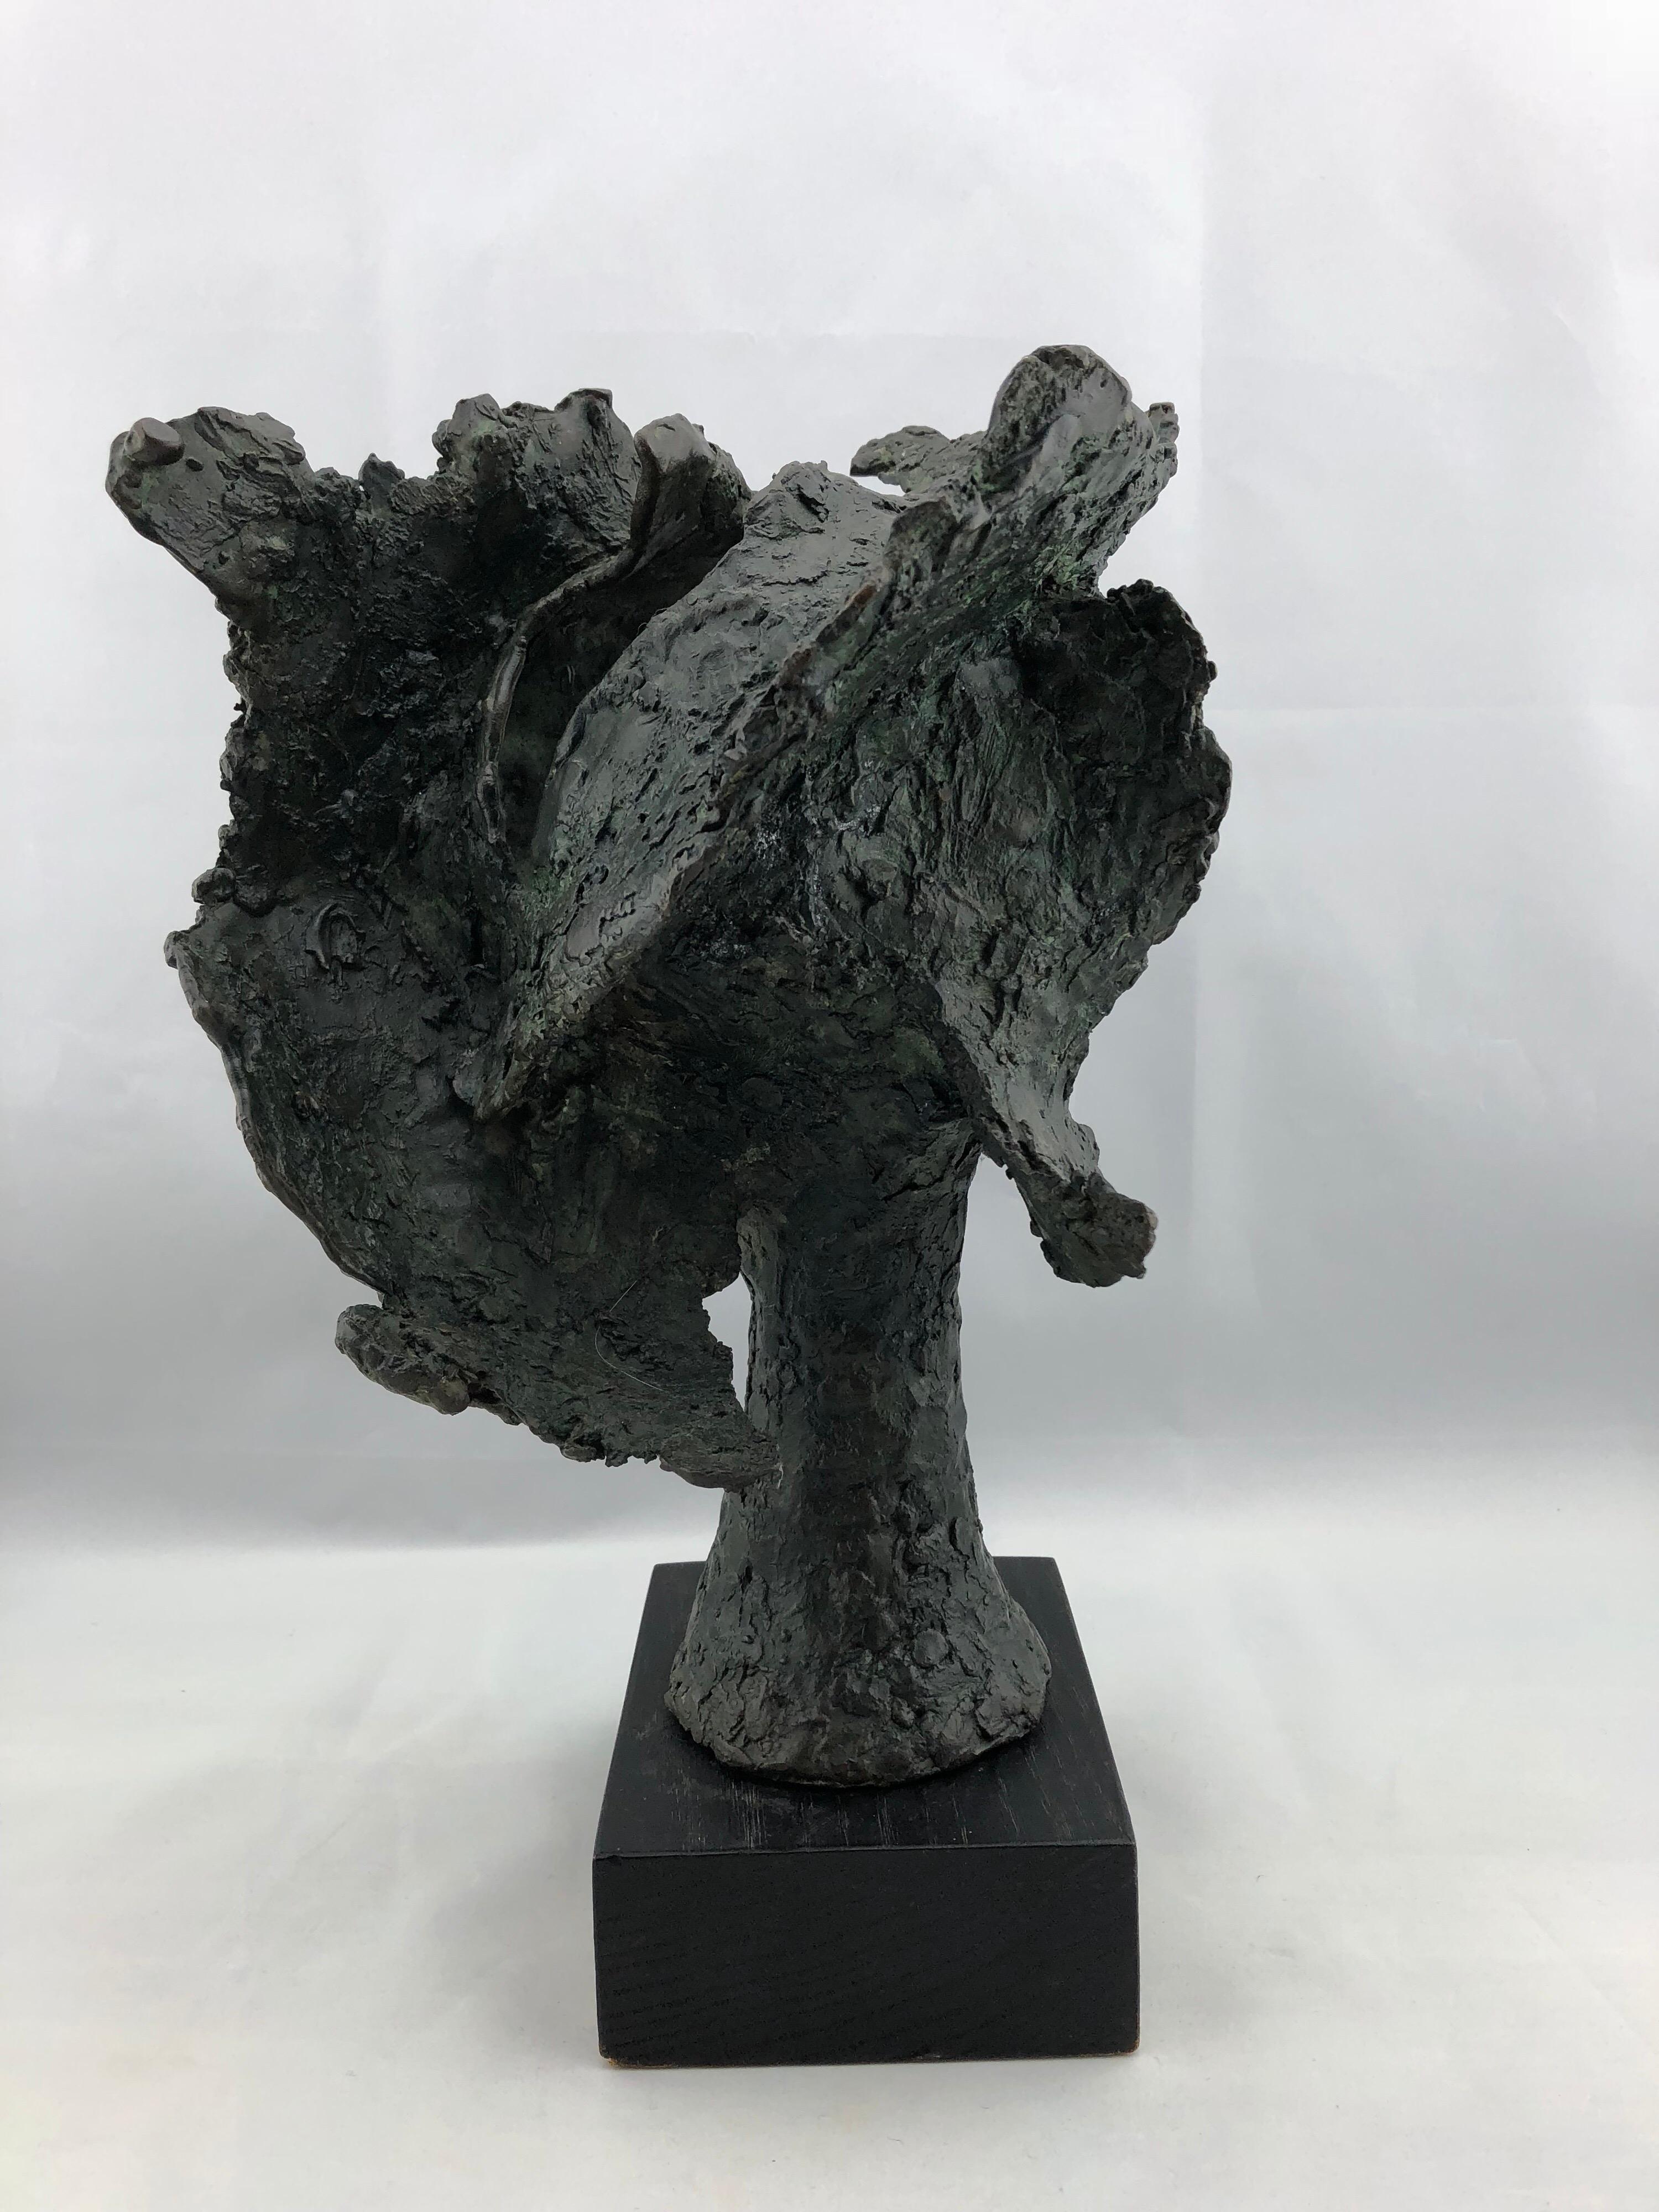 American Rare Vintage Bronze Sculpture by Artist John Begg, Signed and Numbered 1 of 1